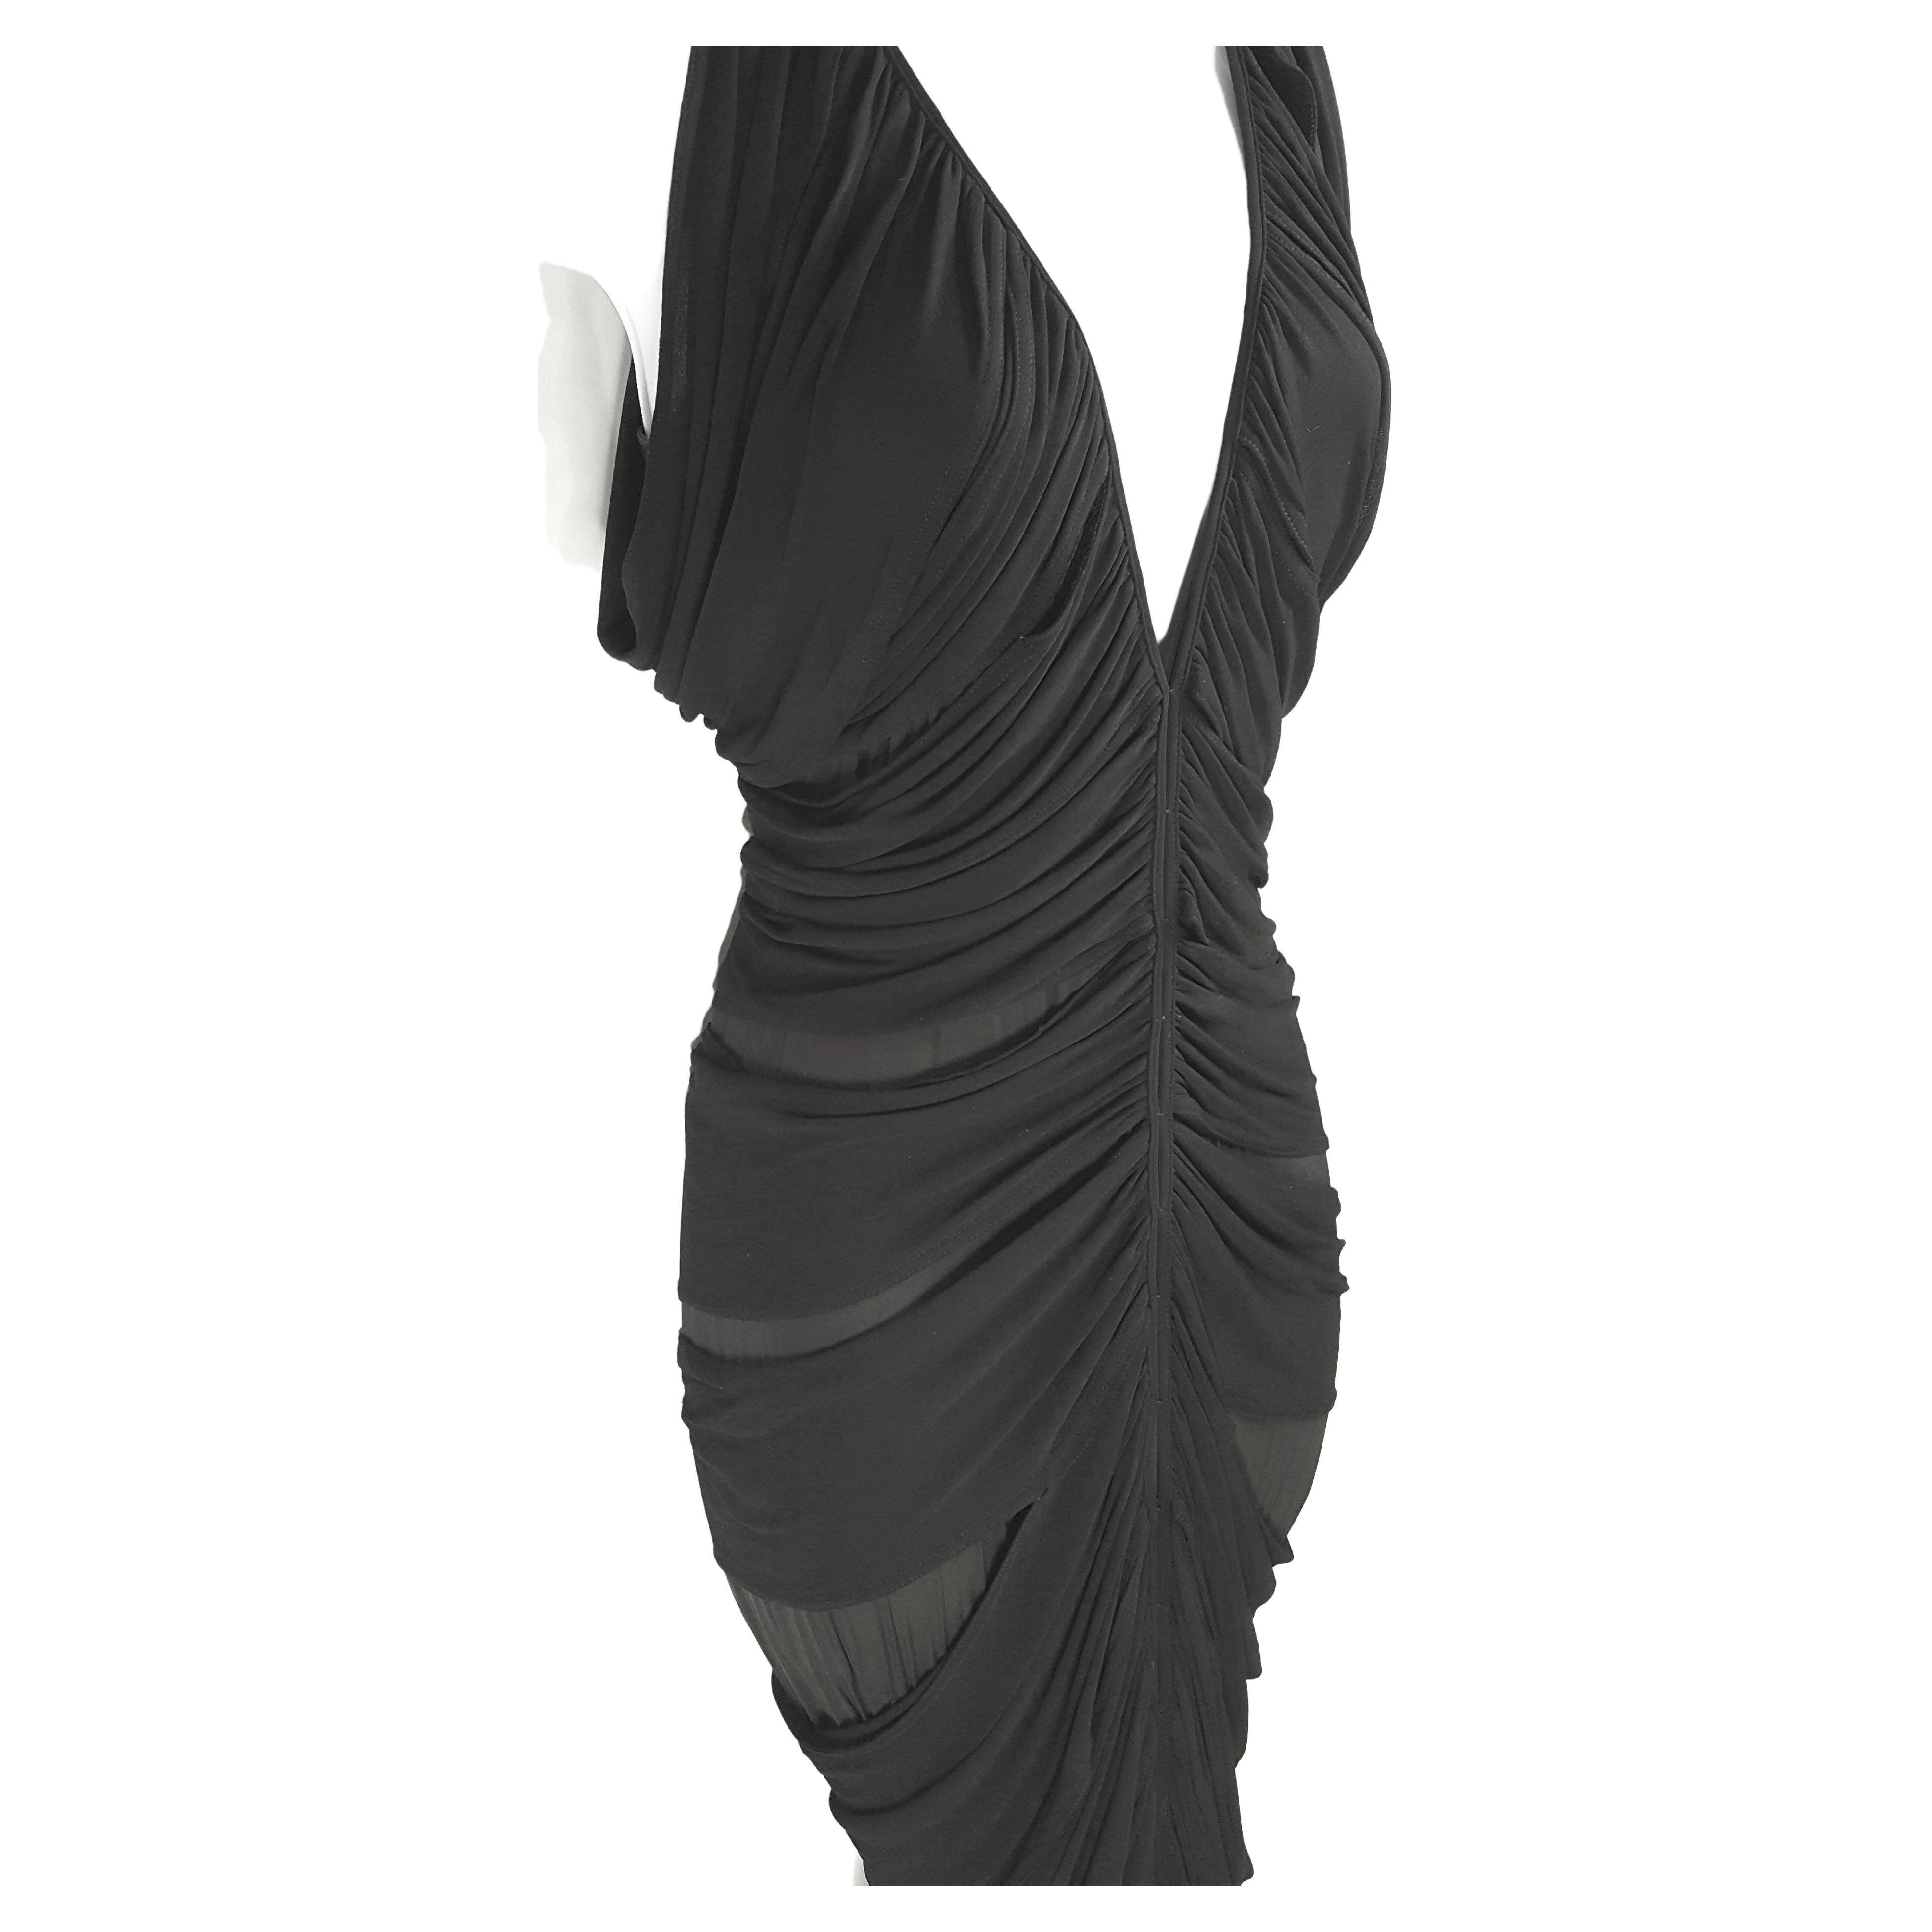 For his first collection for Yves Saint Laurent Paris/Rive Gauche while also creative director at Gucci, American Tom Ford designed this Spring/Summer 2001 black formal evening gown that features a draped and ruched plunging V-neck overlay and